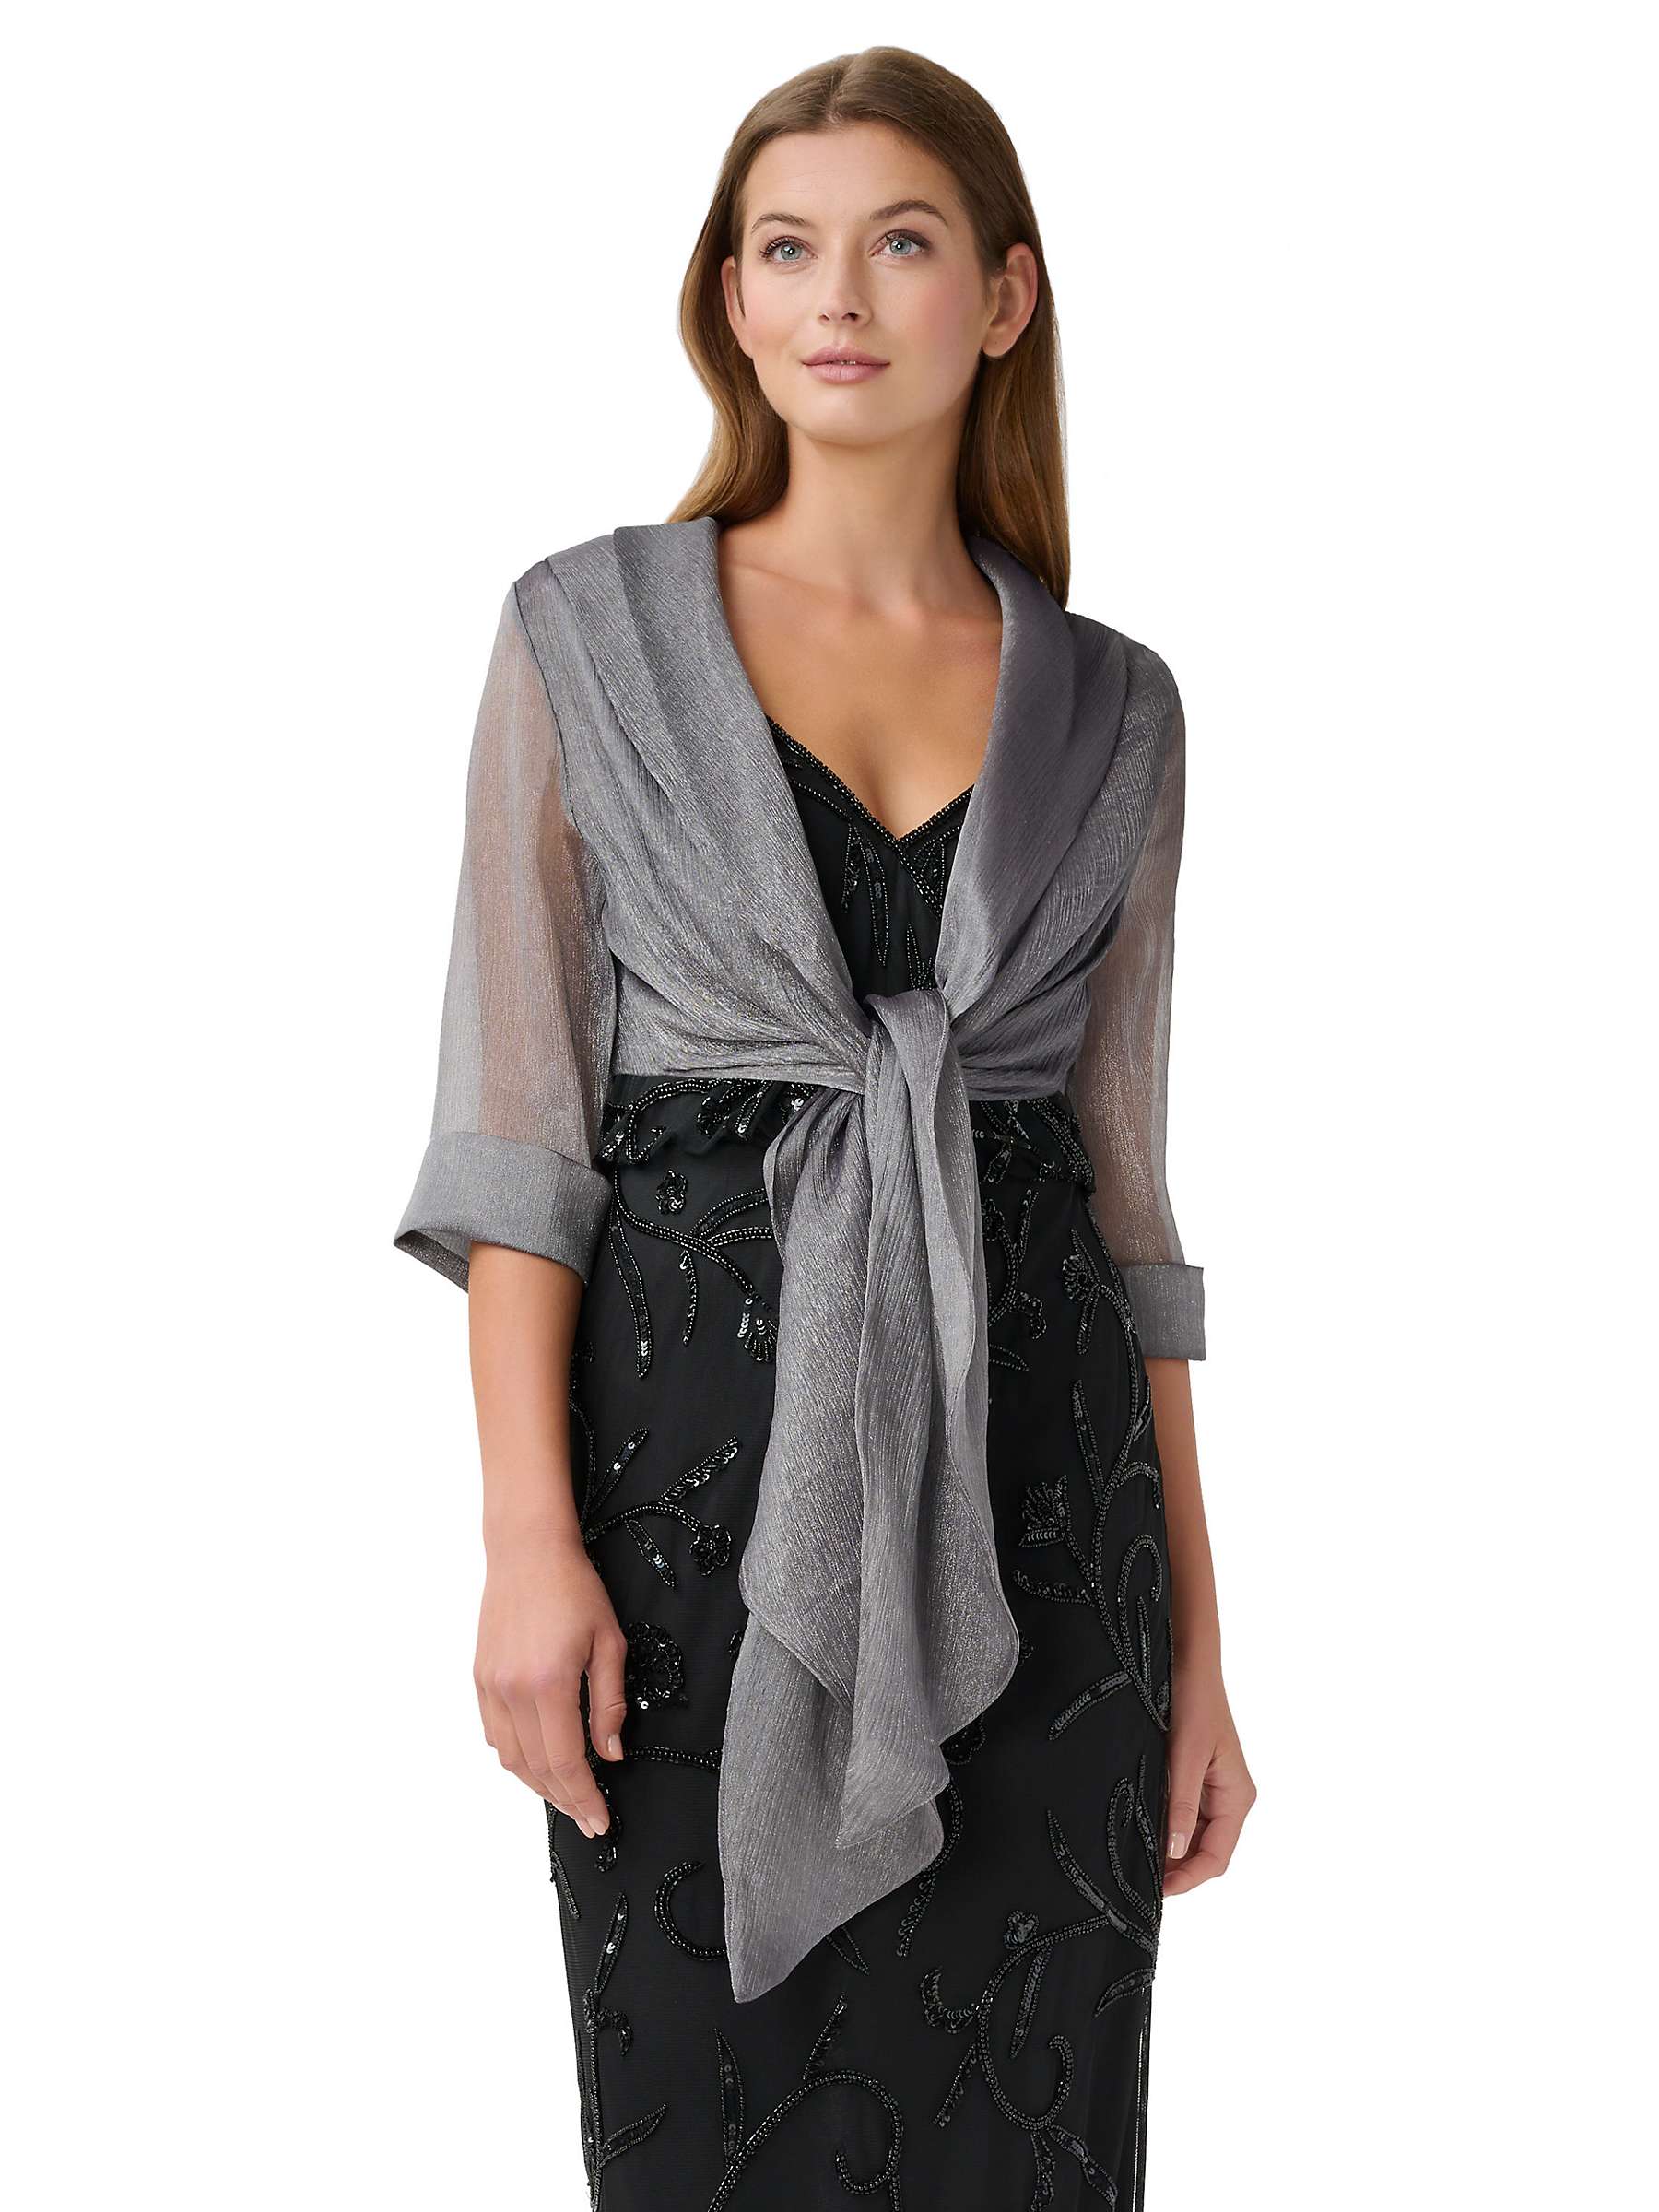 Buy Adrianna Papell Metallic Crinkle Organza Wrap, Silver Online at johnlewis.com